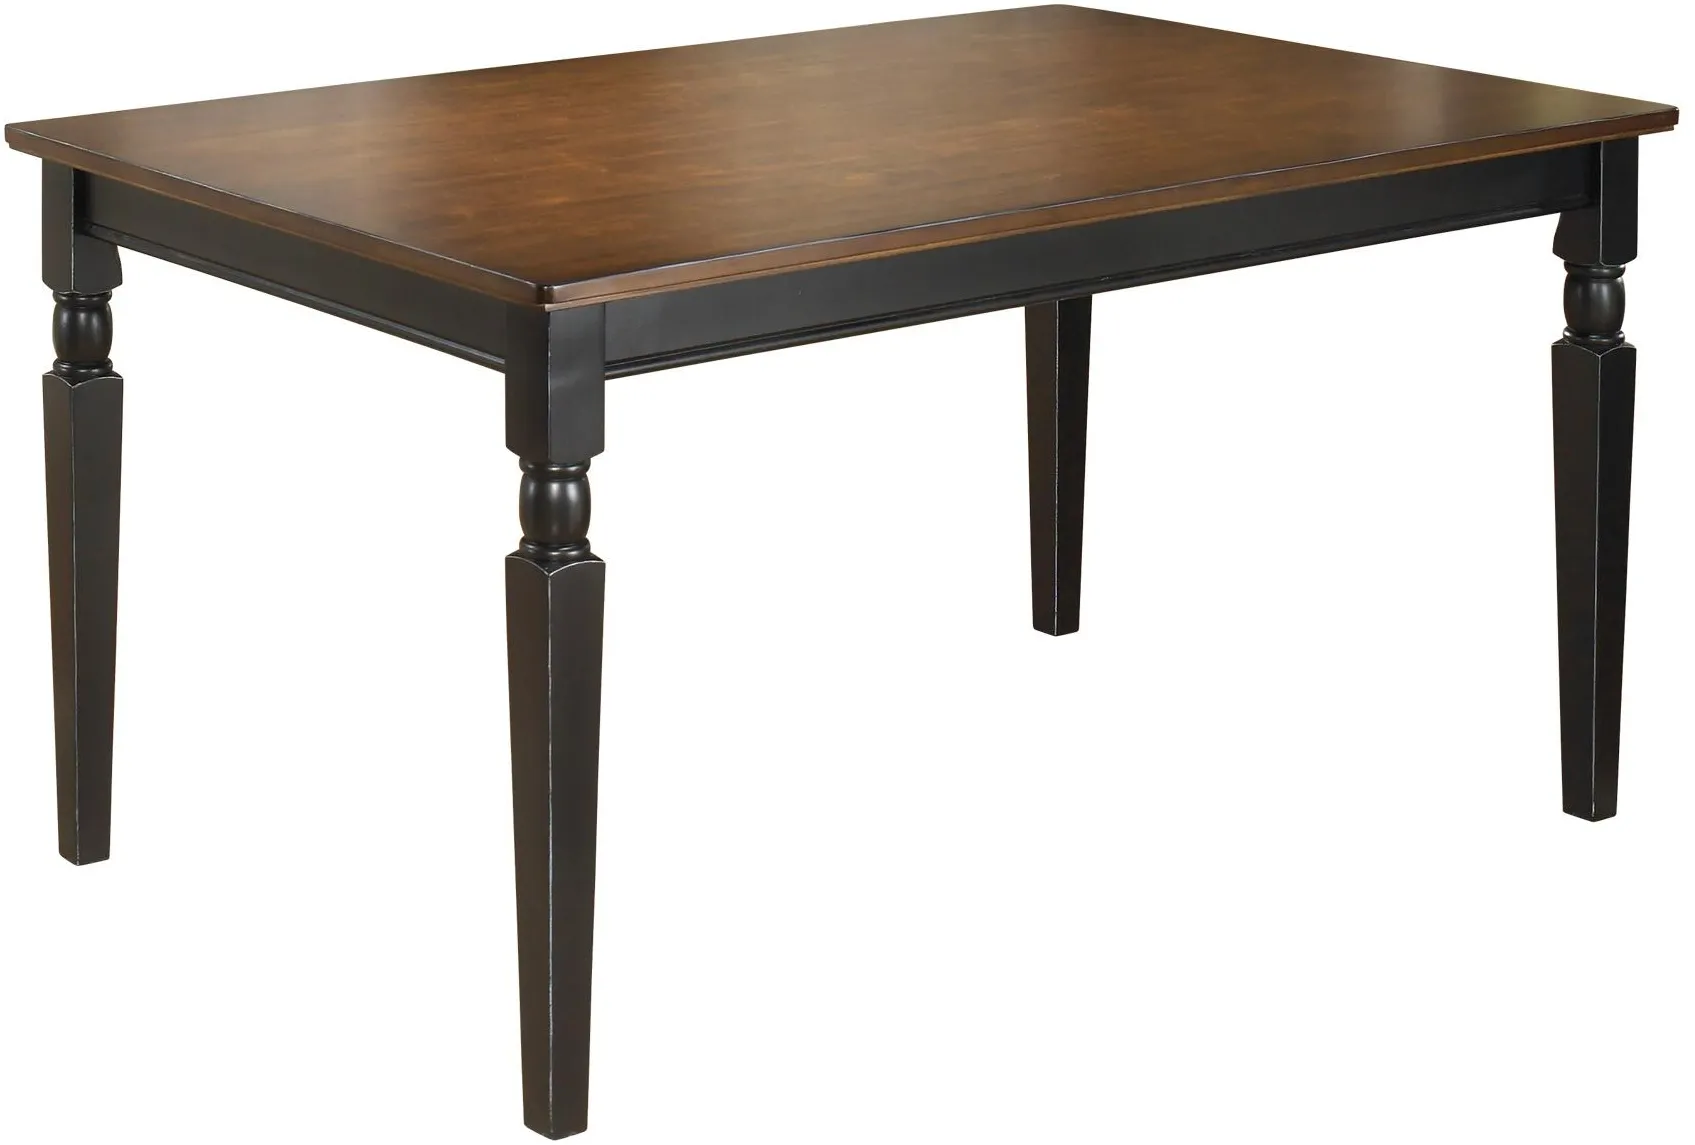 Owingsville Rectangular Dining Room Table by Ashley